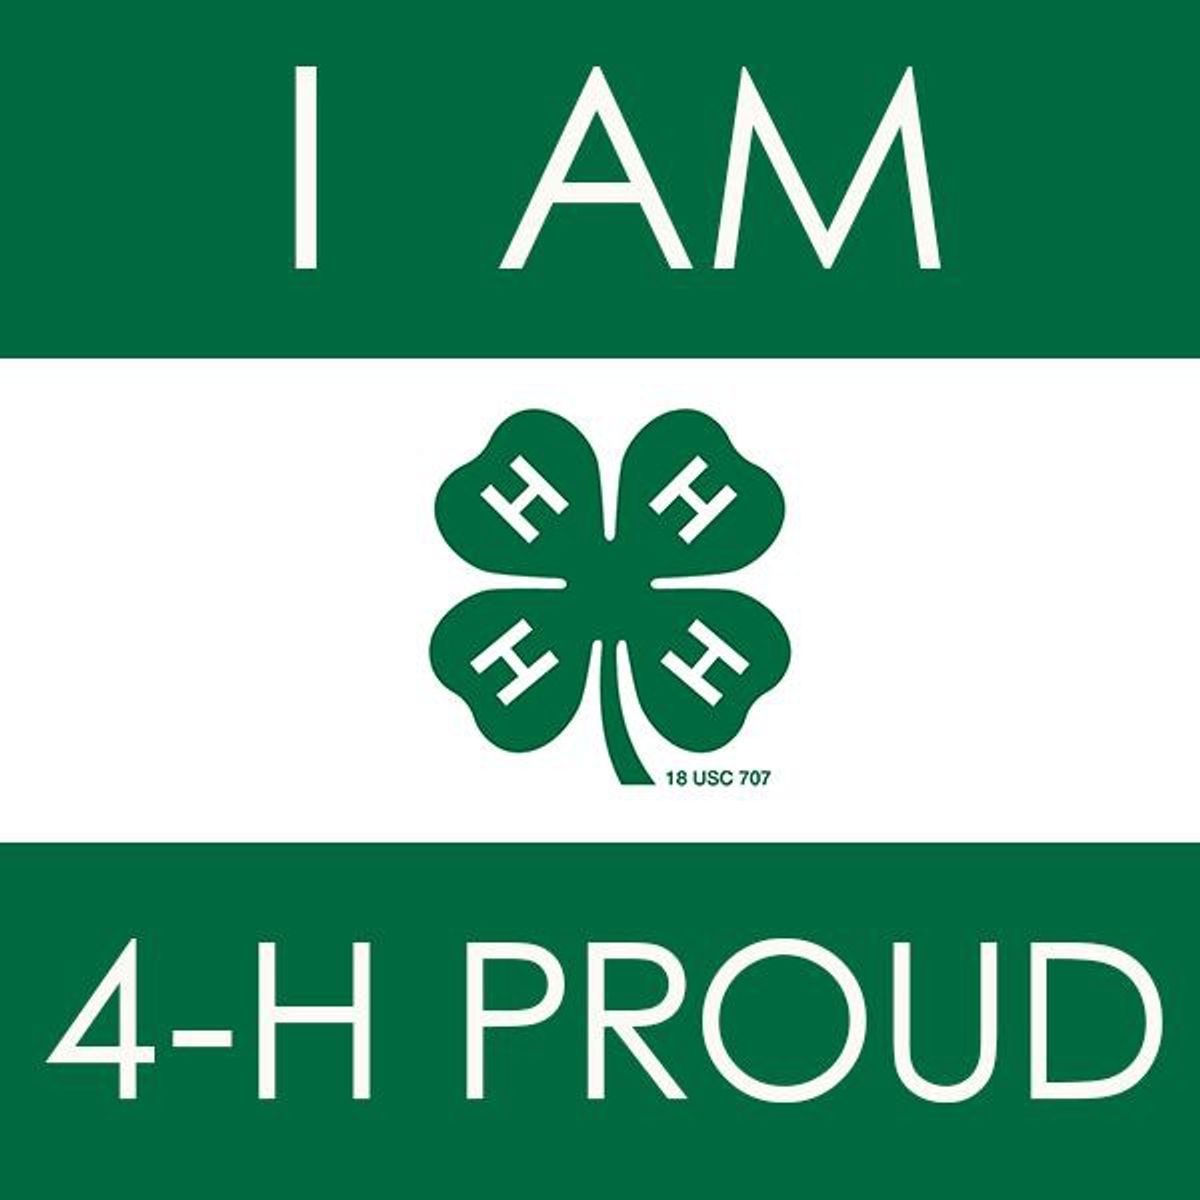 A Thank You to 4-H